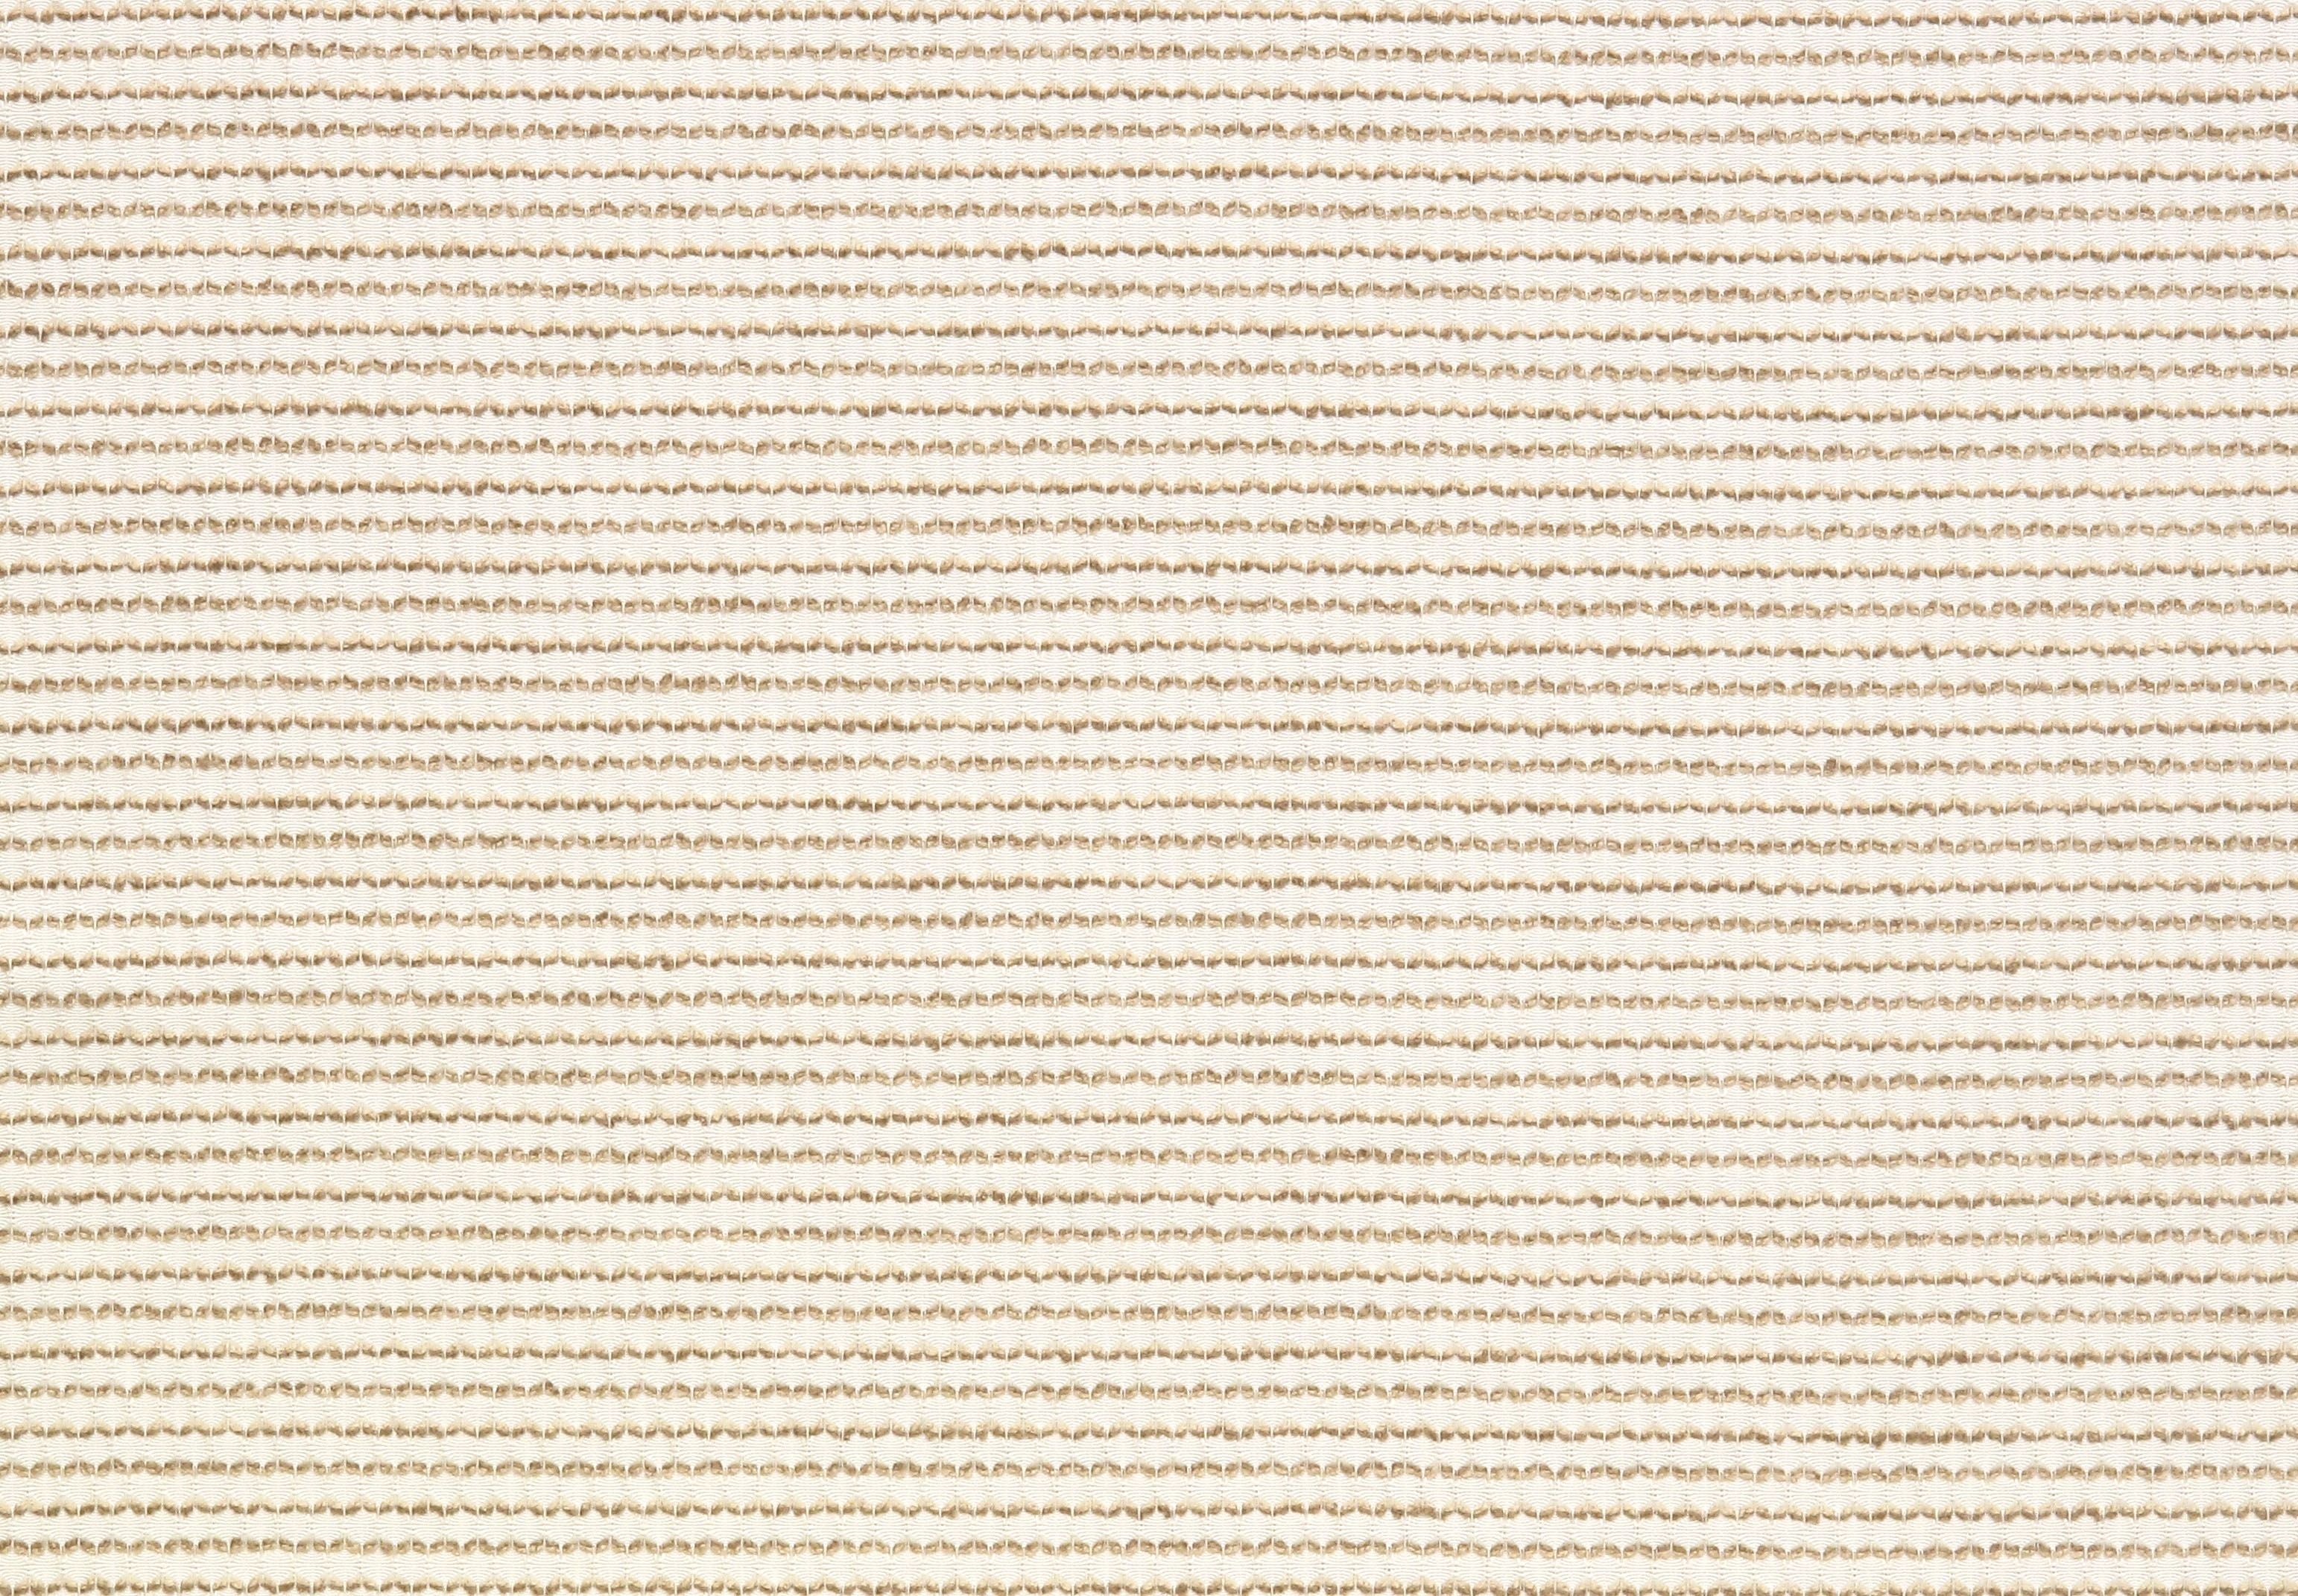 Belknap fabric in pecan color - pattern number VW 00041532 - by Scalamandre in the Old World Weavers collection